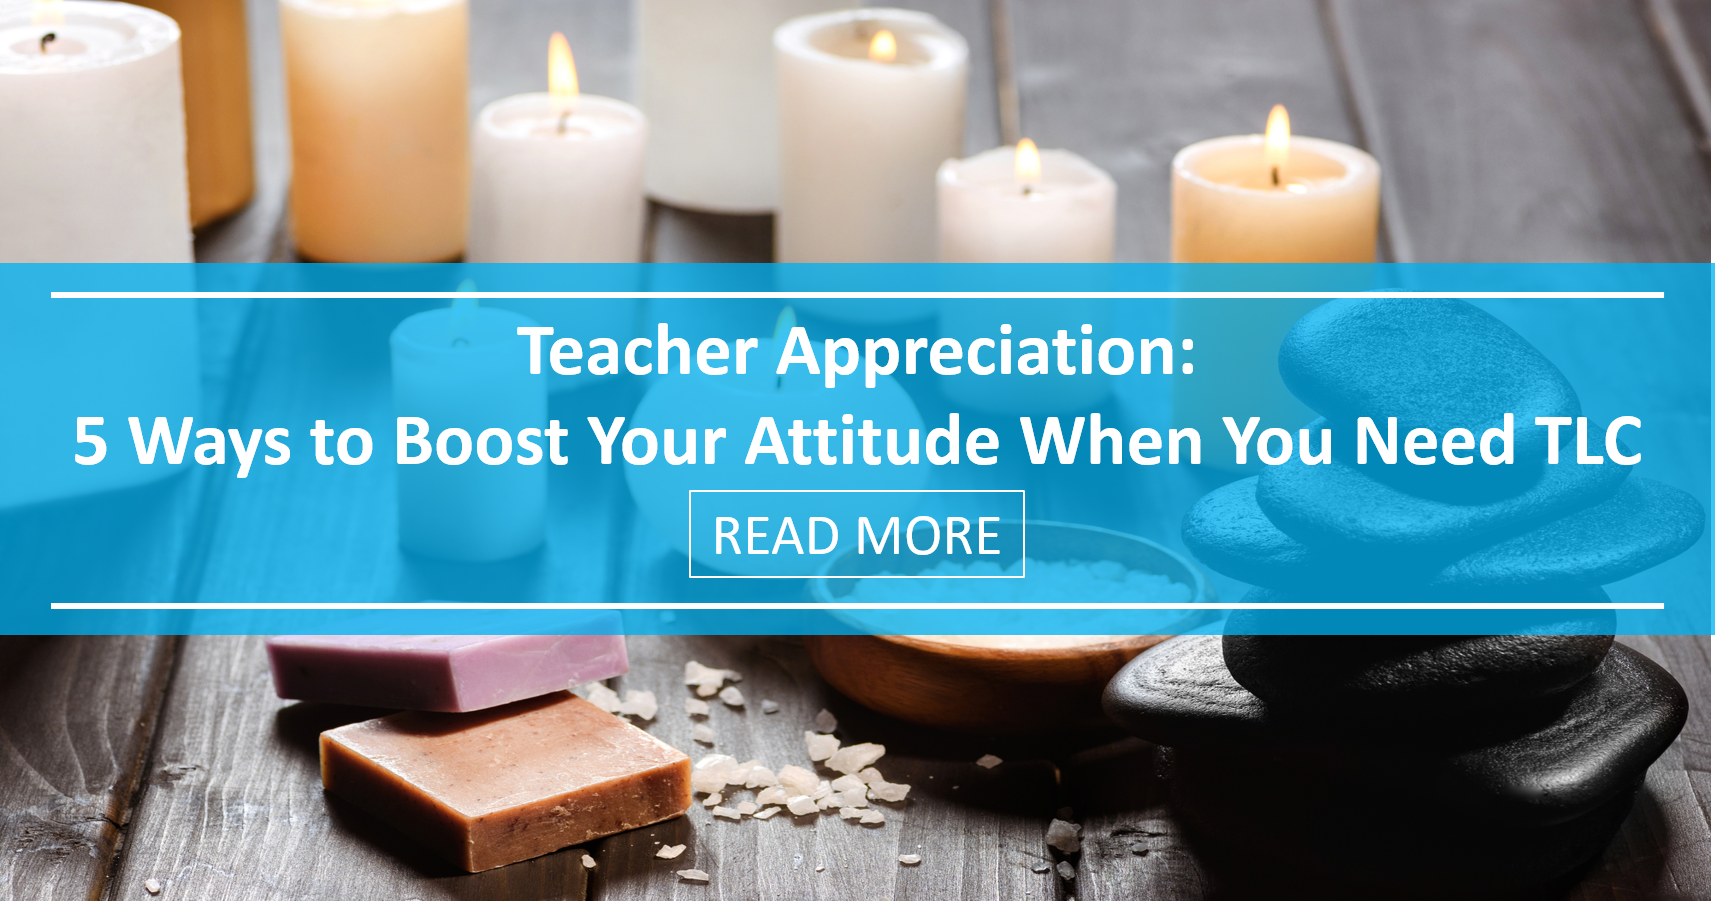 Teacher Appreciation: 5 Ways to Boost Your Attitude When You Need Some TLC